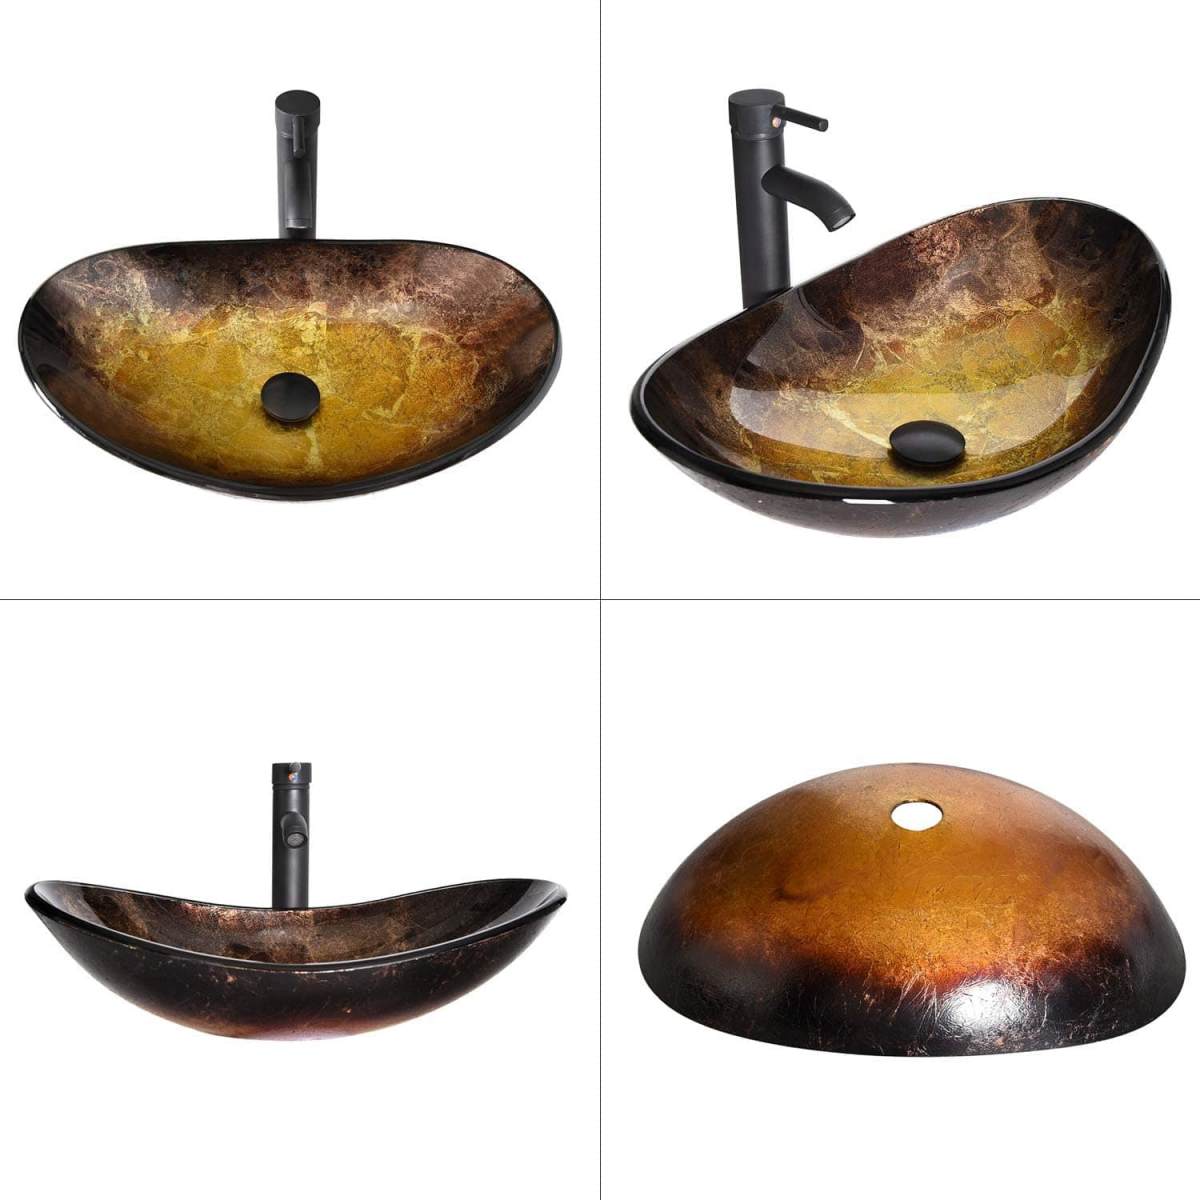 Four angle views of Elecwish Gold Boat Sink